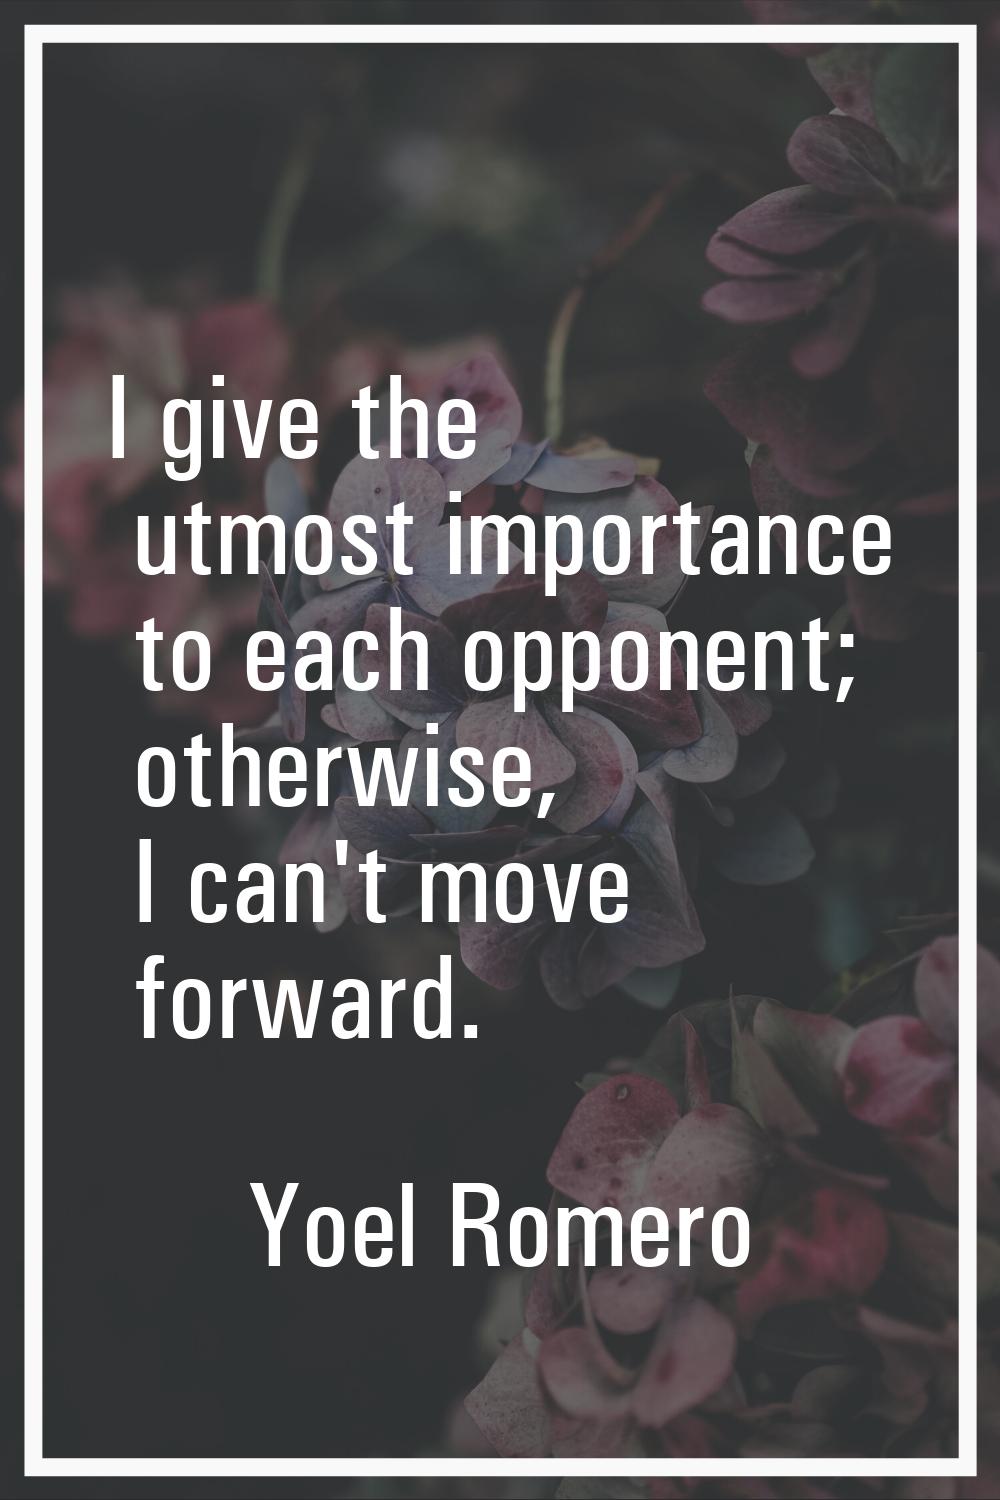 I give the utmost importance to each opponent; otherwise, I can't move forward.